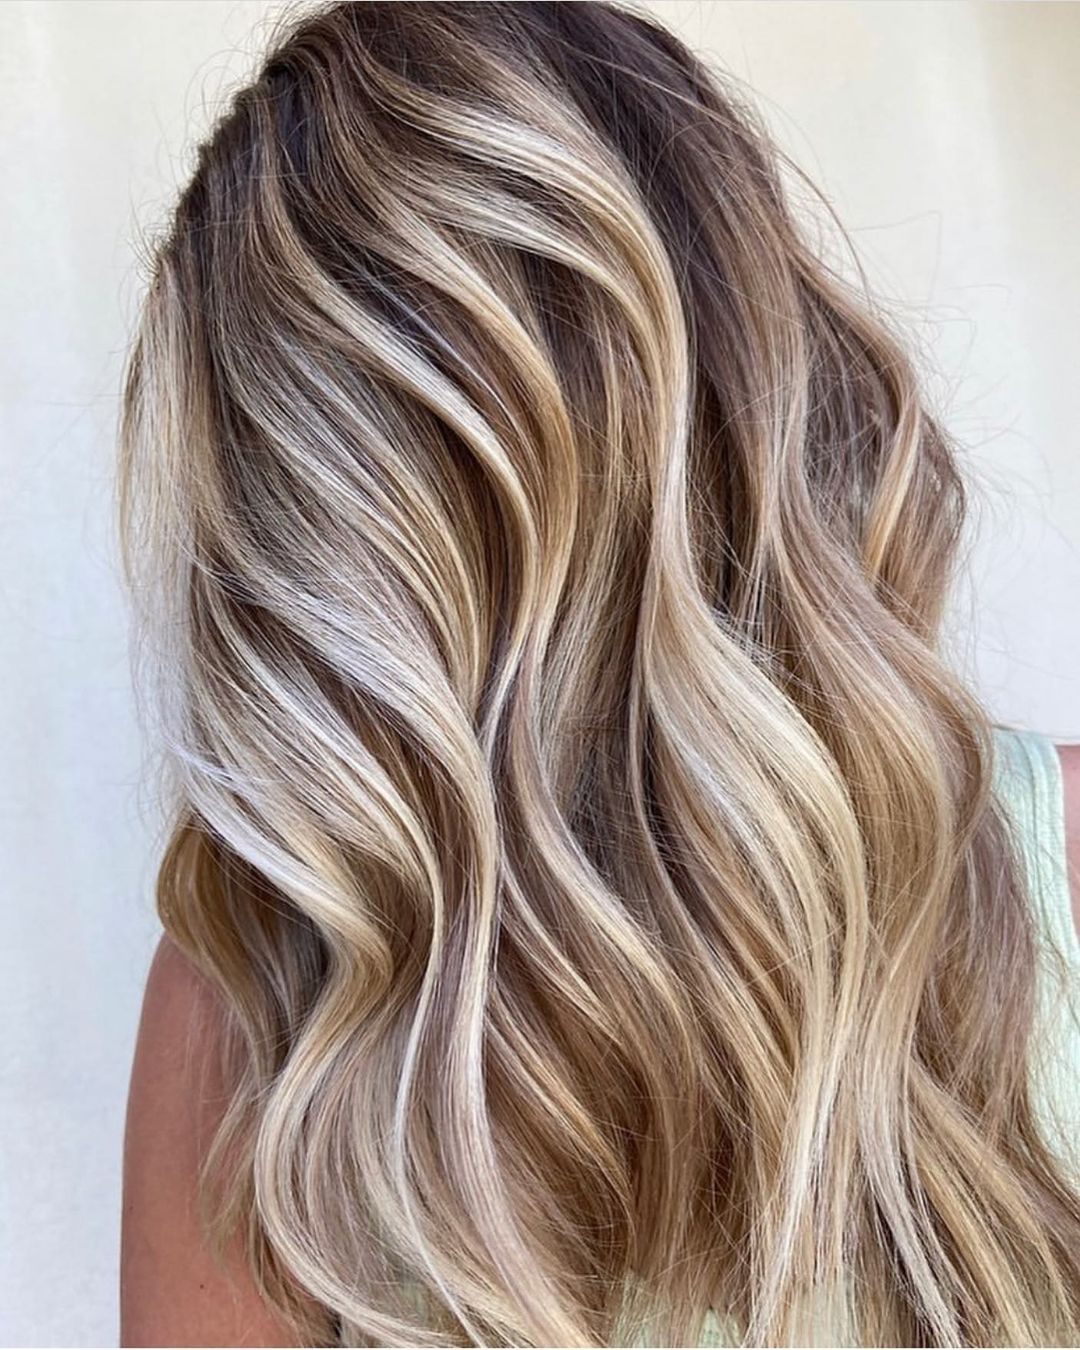 50 Newest Hairstyle For Women And Hair Trends For 2021 images 8